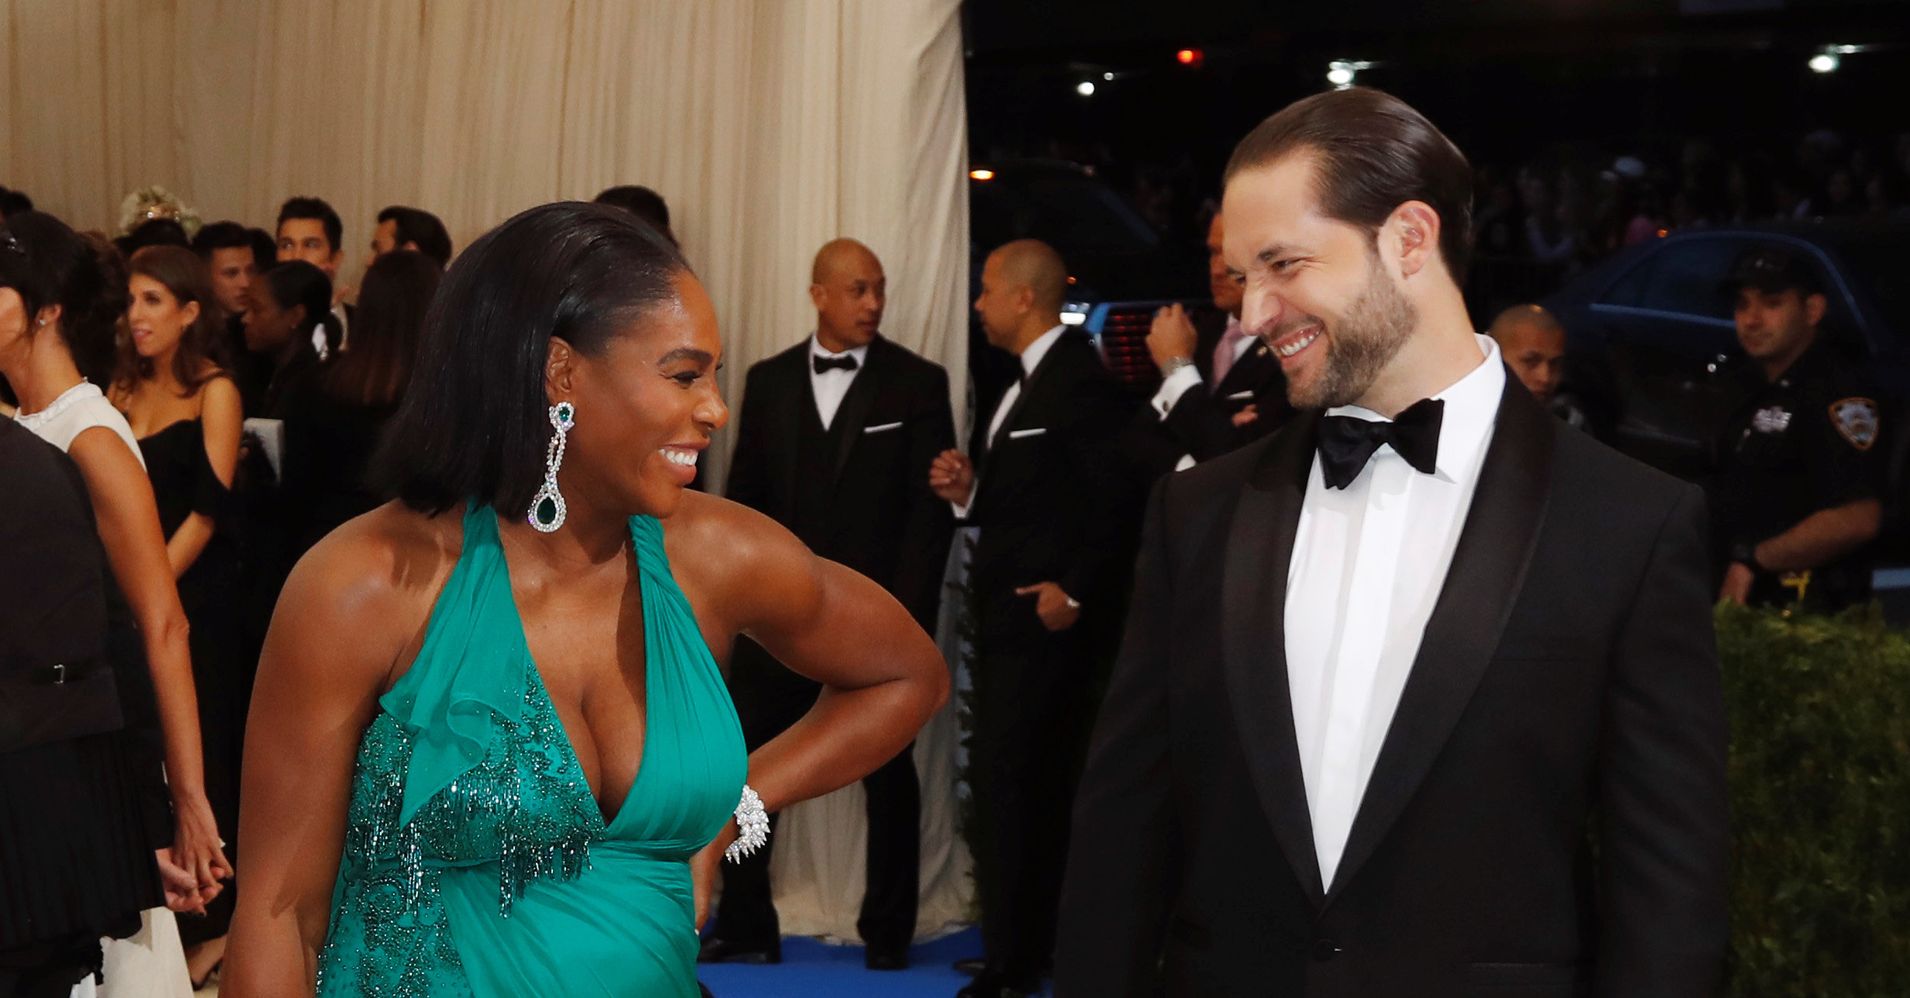 Serena Williams' First Words To Her Fiancé Will Make You Cringe | HuffPost1910 x 998